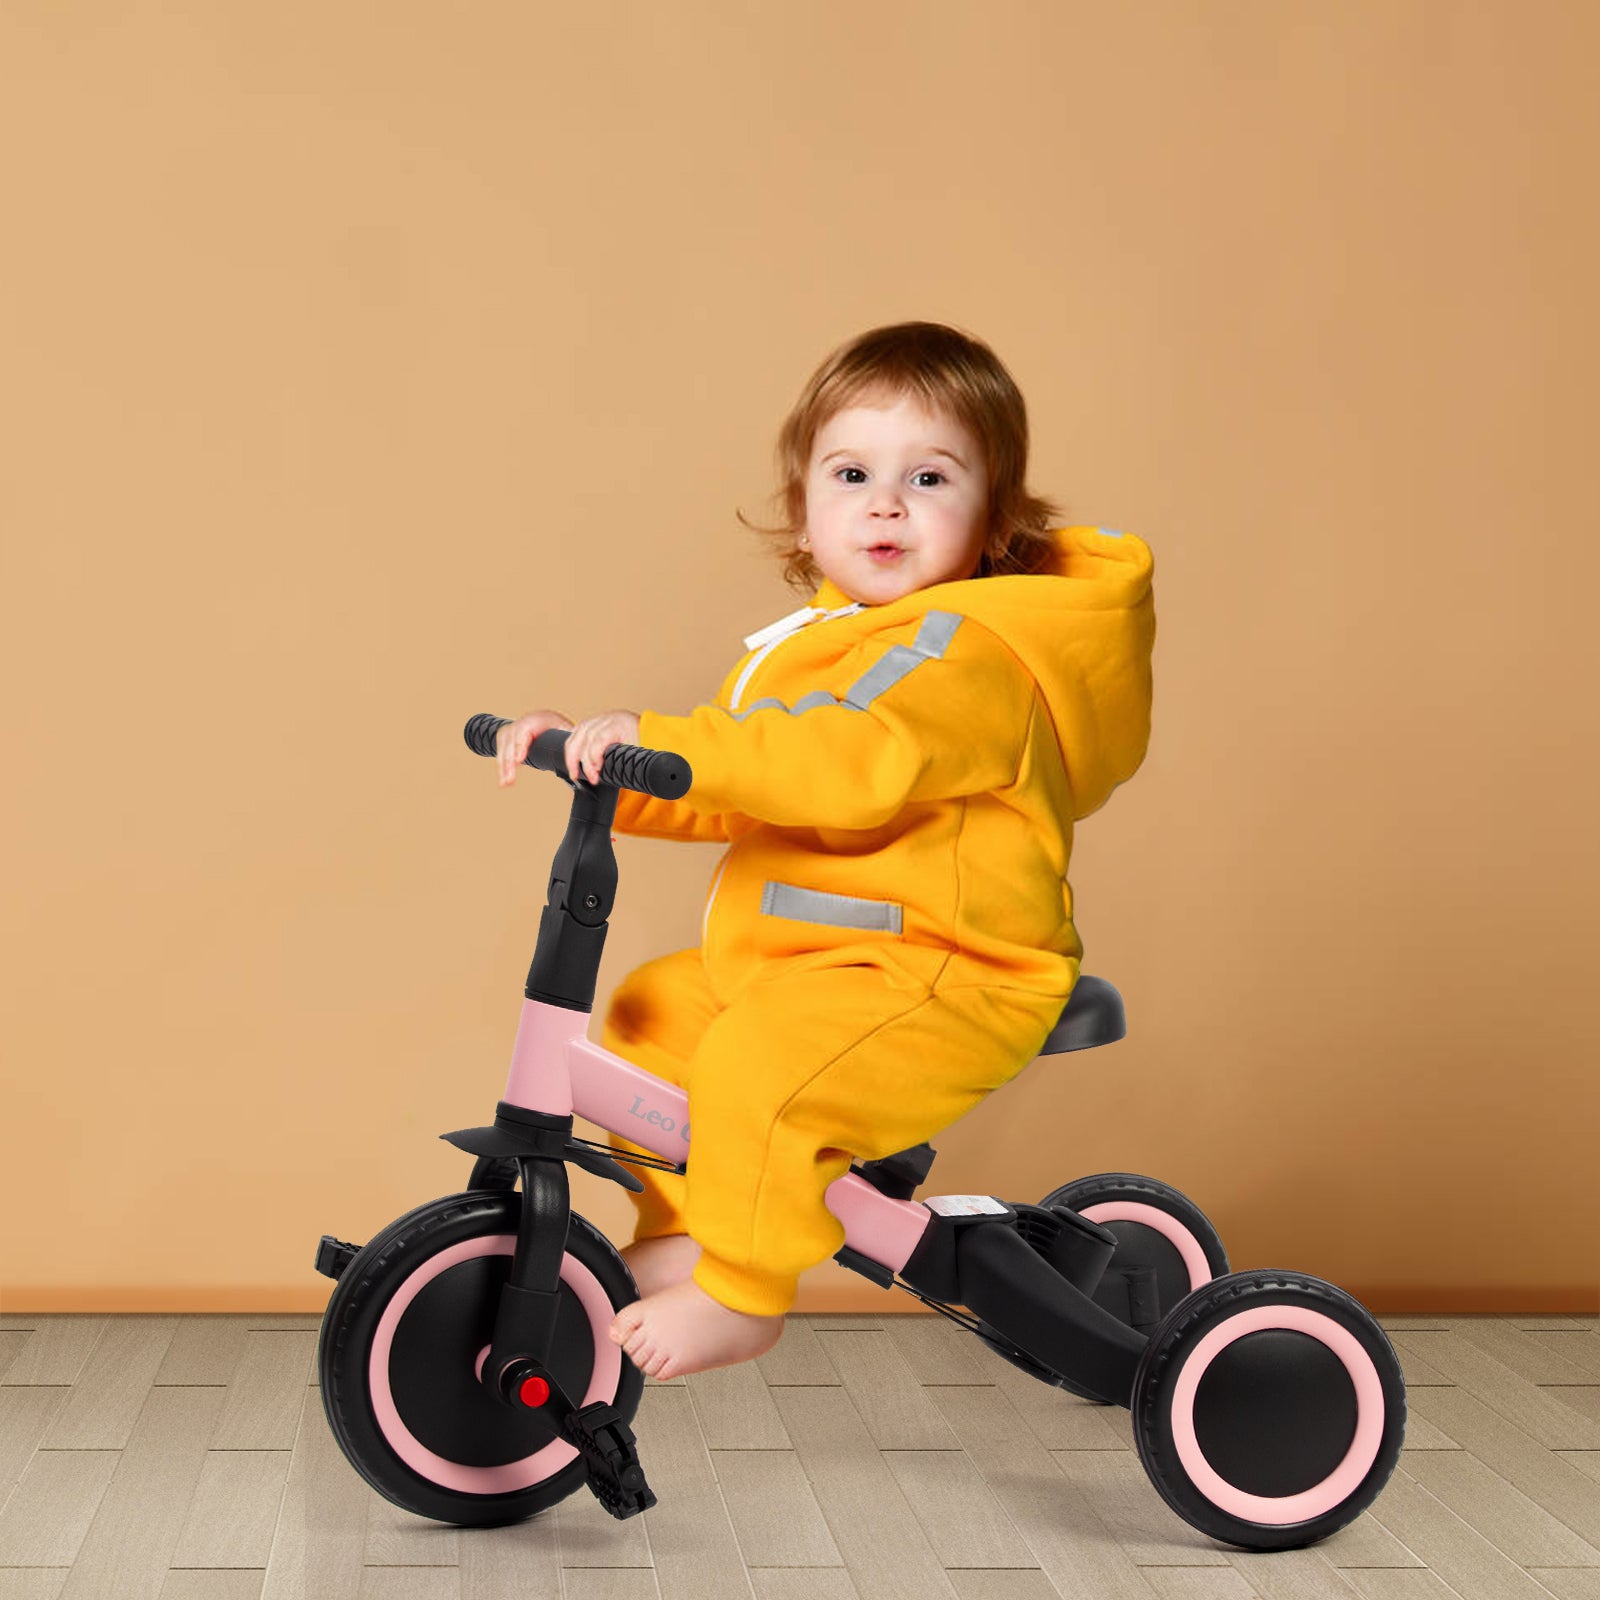 4-in-1-Children-s-Tricycle-Bike-Balance-Bike-Balance-Bike-with-Push-Bar-for-Boys-Girls-Ages-1-to-3-Load-25-kg-Pink-4-in-1-Children-s-Tricycle-Bike-Pink